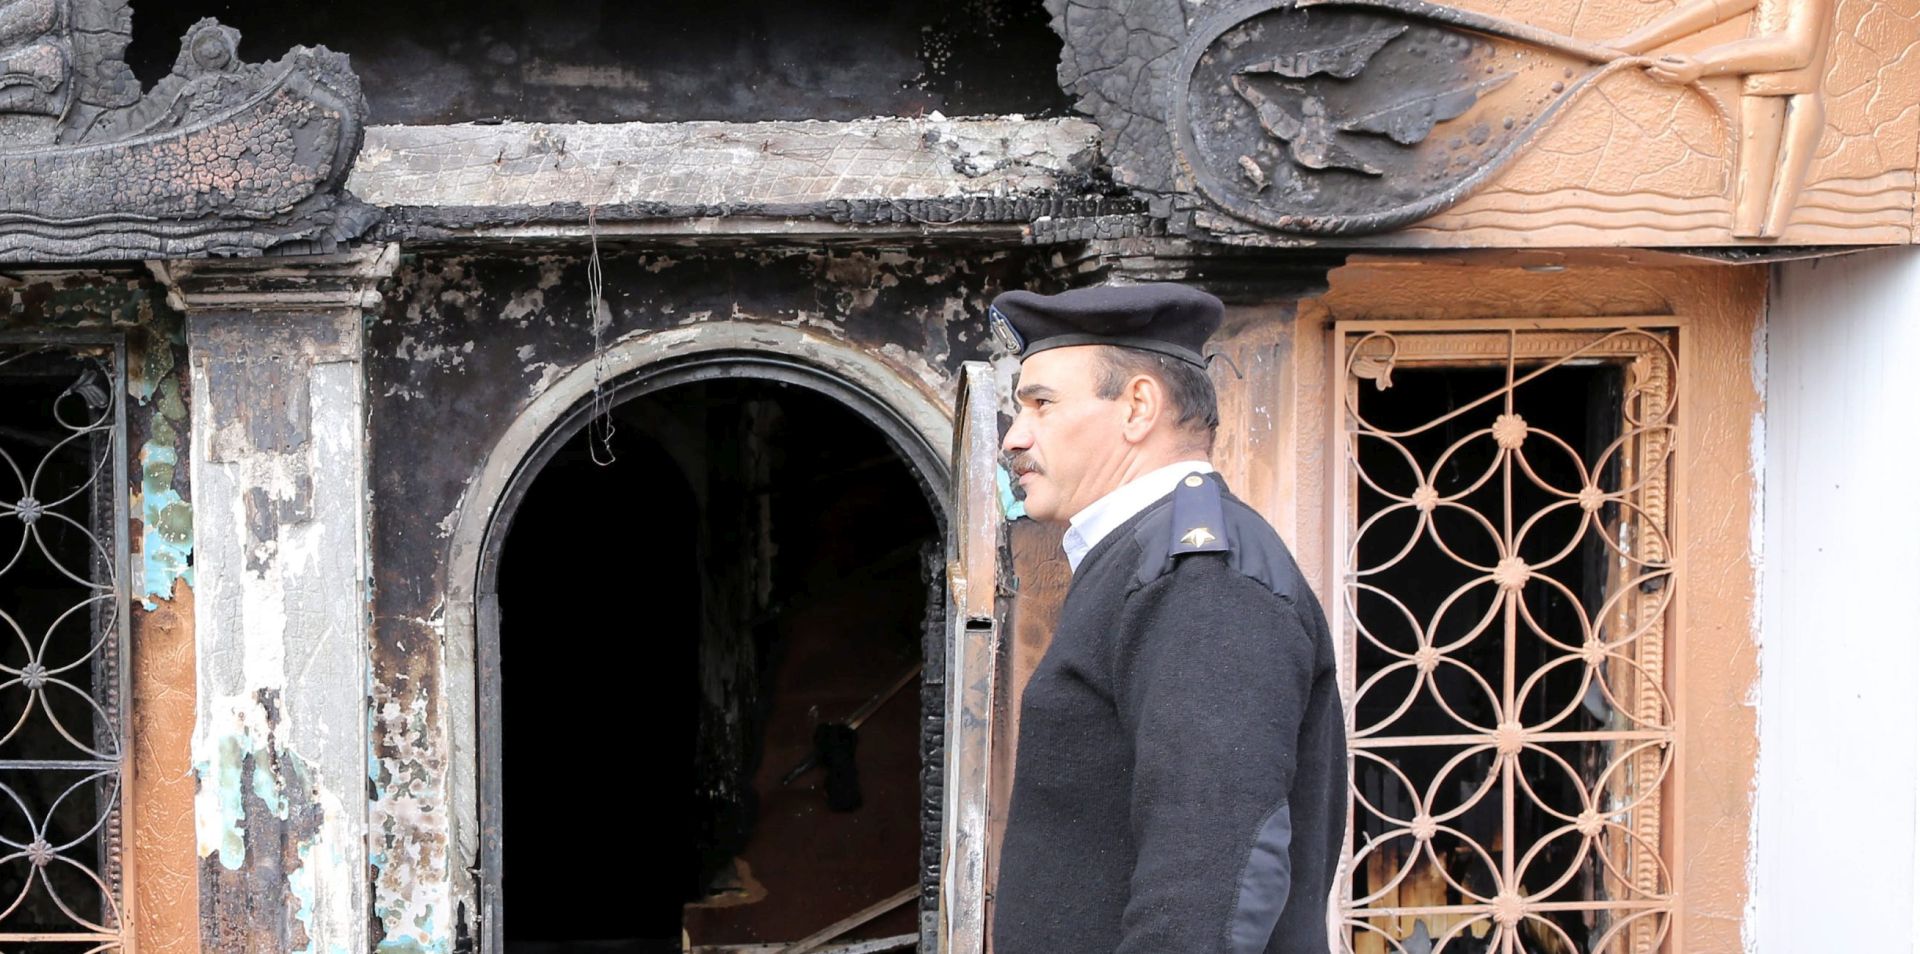 epa05053946 Members of the Egyptian security  stand guard in the restaurant that was attacked near Cairo, Egypt, 04 December 2015. At least 12 people were killed in an overnight attack on a restaurant near Cairo, reports say that attackers threw petrol bombs at the restaurant in the plush quarter of Agouza, sparking a fire in the place. An unspecified number of people were also reported injured in the attack, the motives of which were not immediately clear. Egypt has seen a surge in militant attacks, mainly against security forces, since the military's 2013 overthrow of Islamist president Mohammed Morsi.  EPA/KHALED ELFIQI